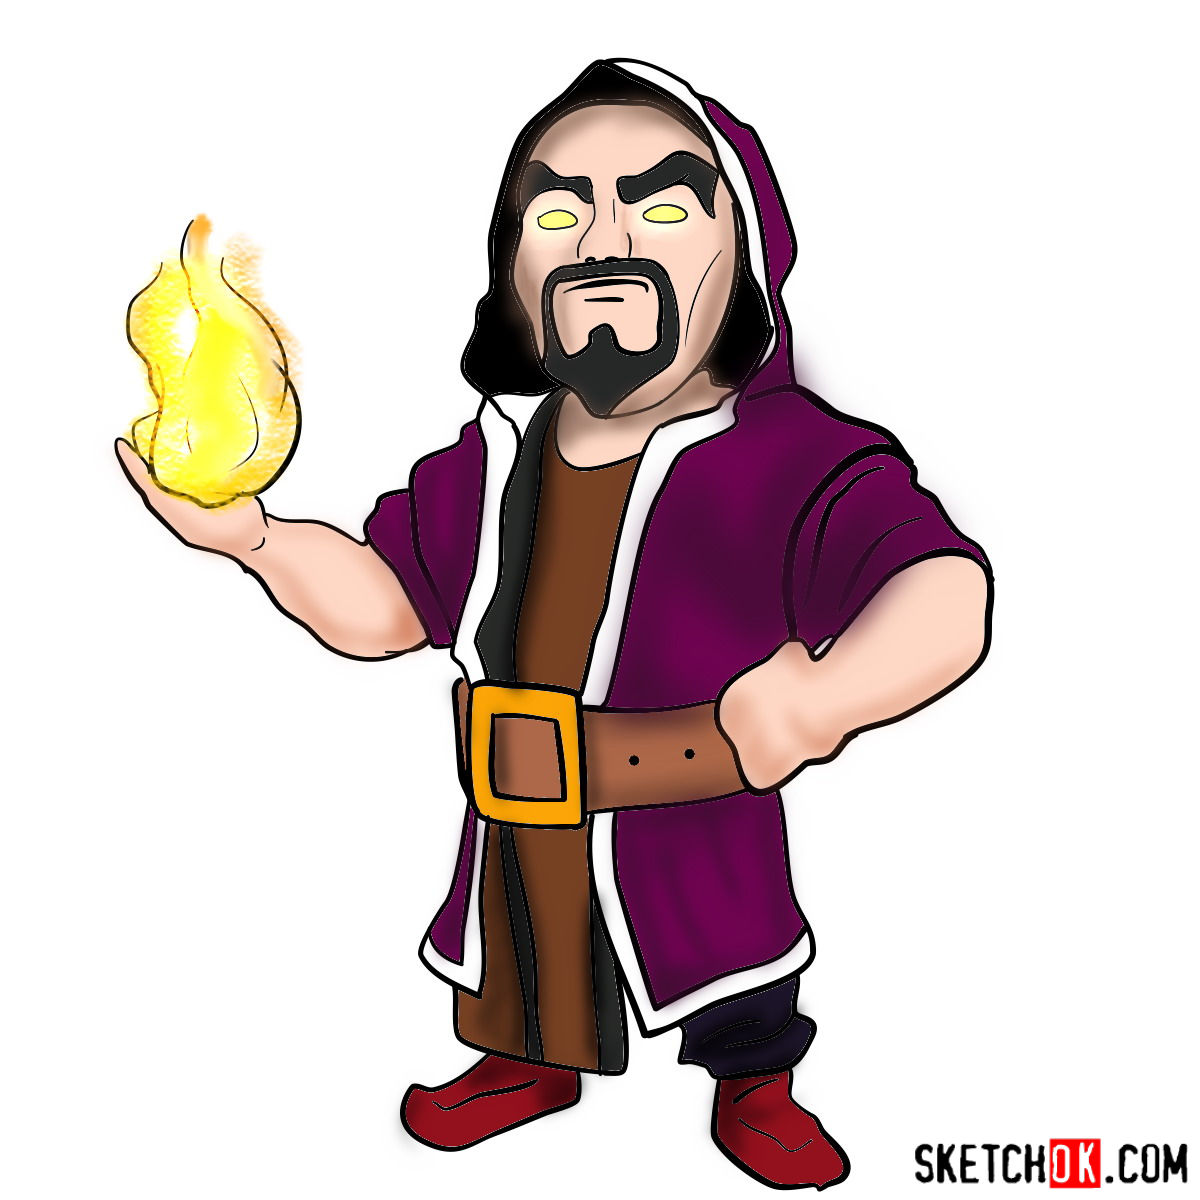 How to draw Wizard from Clash of Clans - Sketchok easy drawing guides.